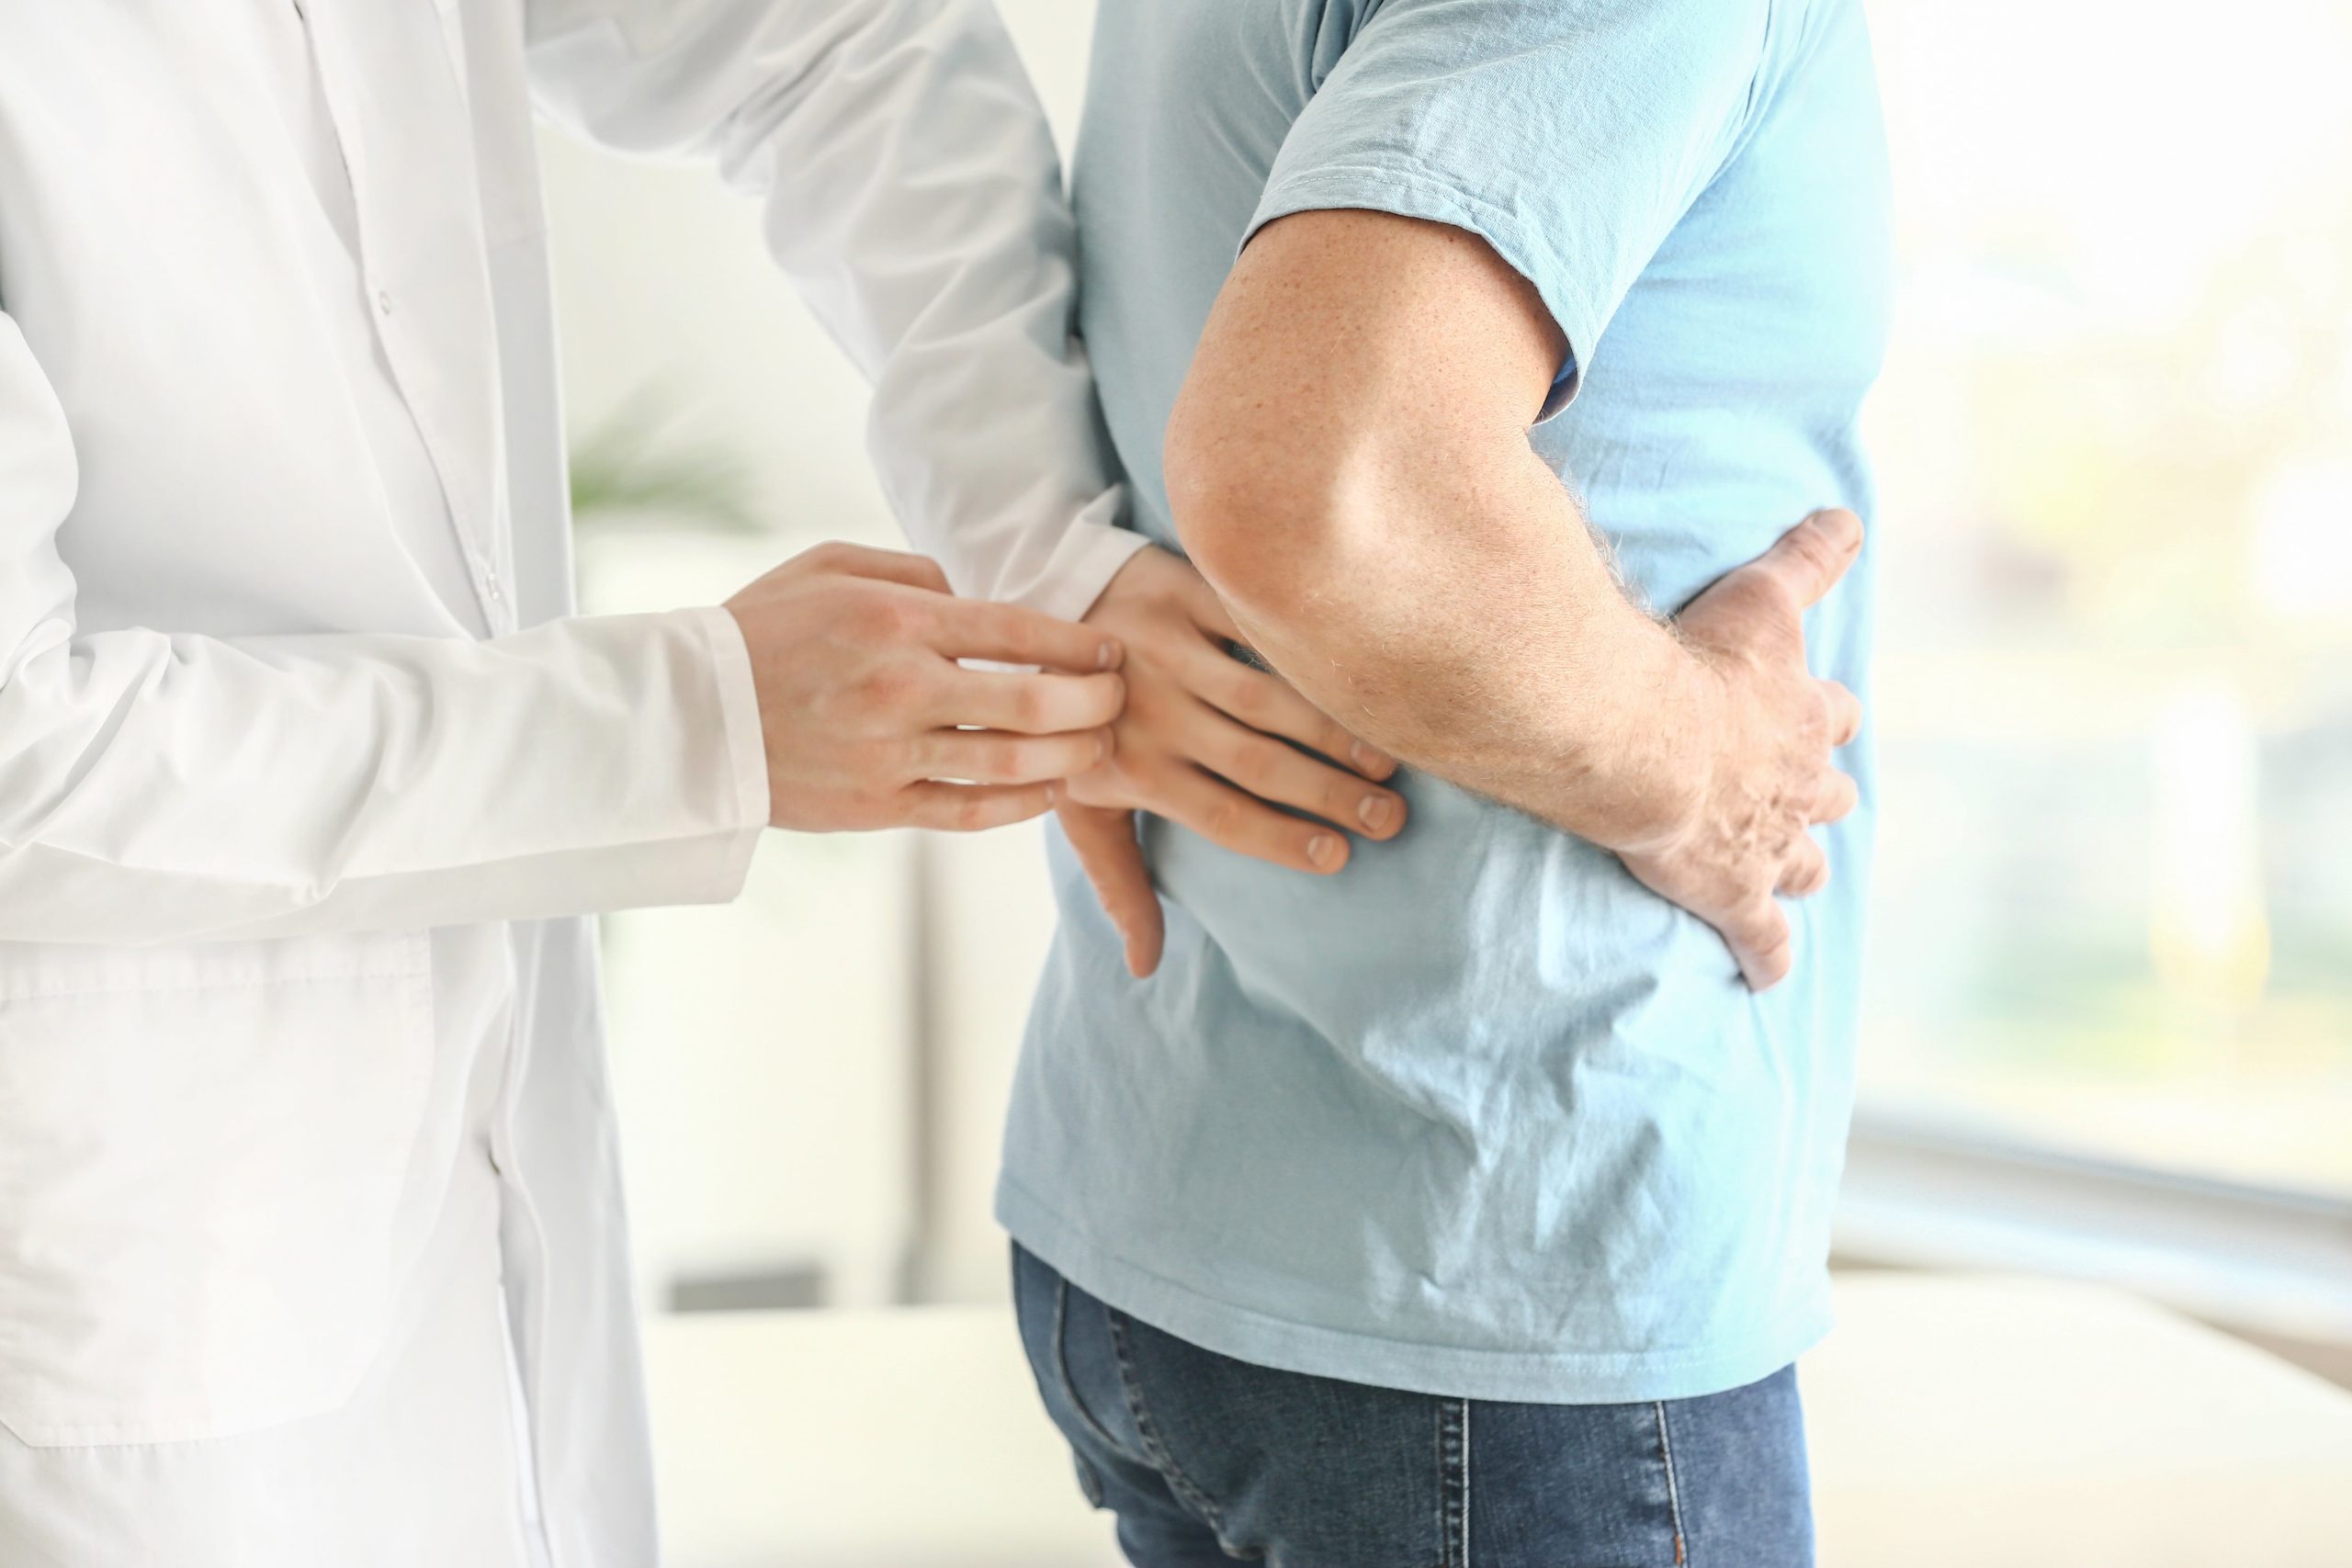 Doctor examining a patient with kidney disease